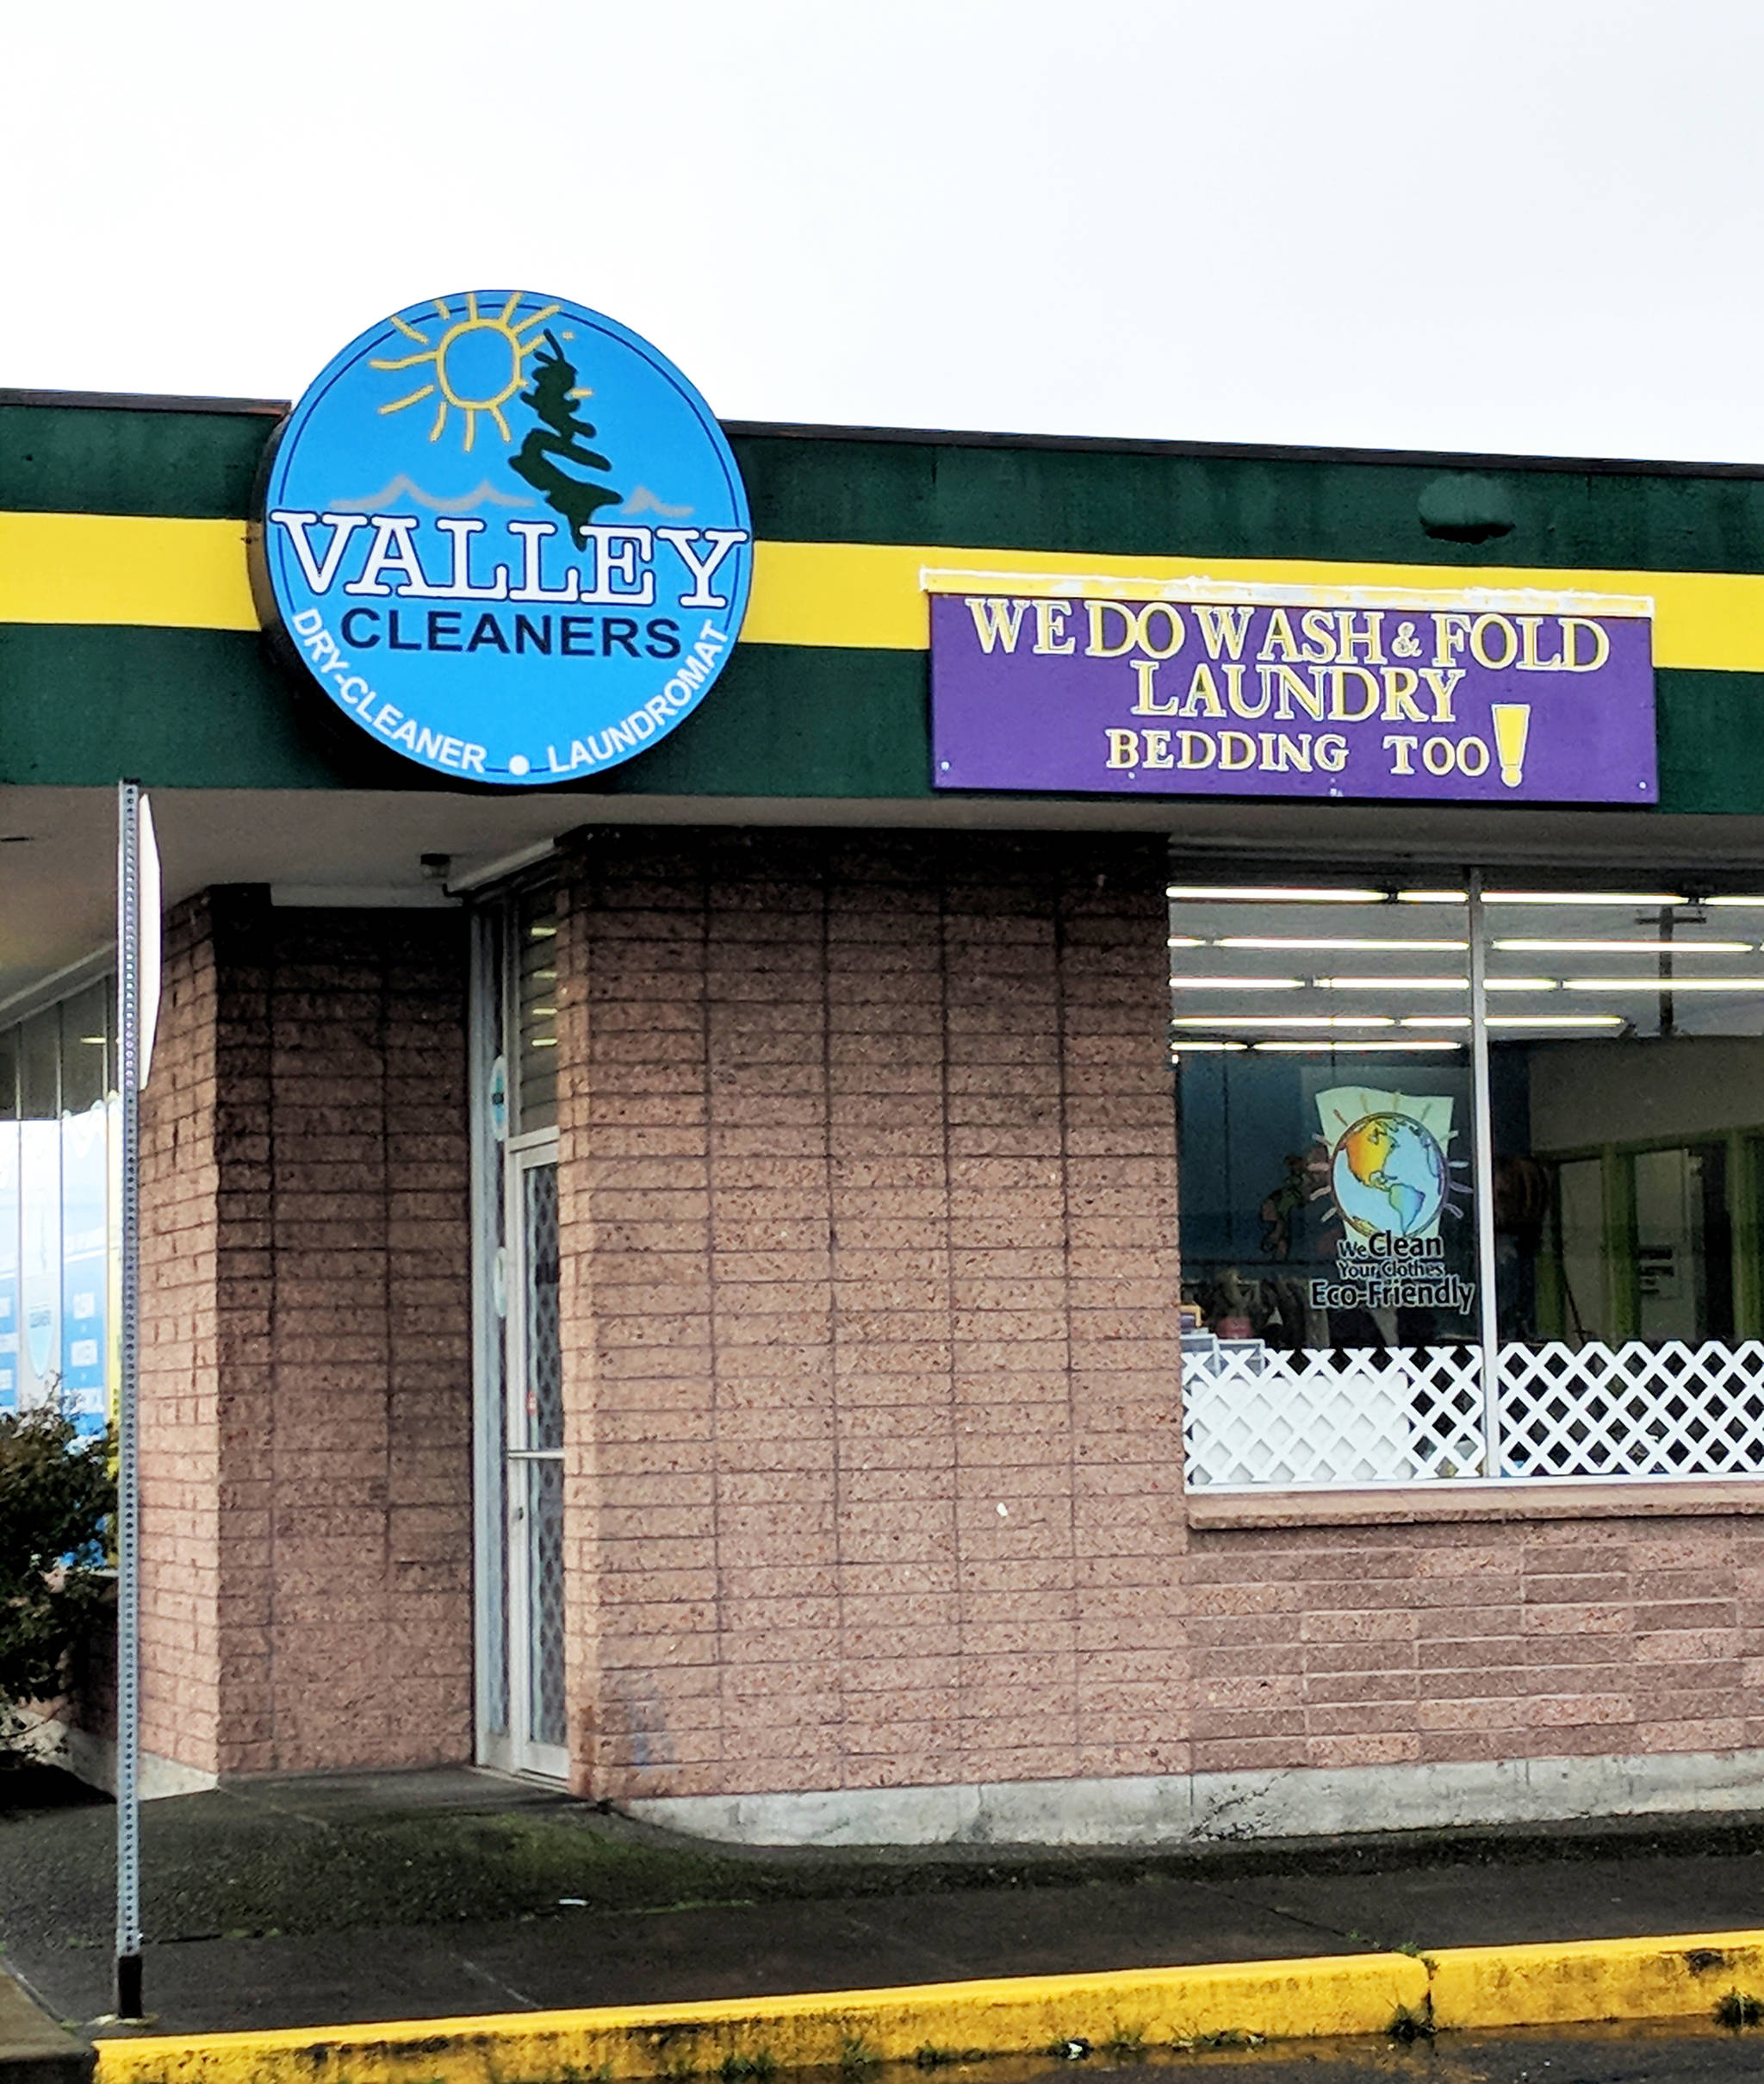 Valley Cleaners was one of the first dry cleaners in the state to embrace environmentally friendly cleaning products.